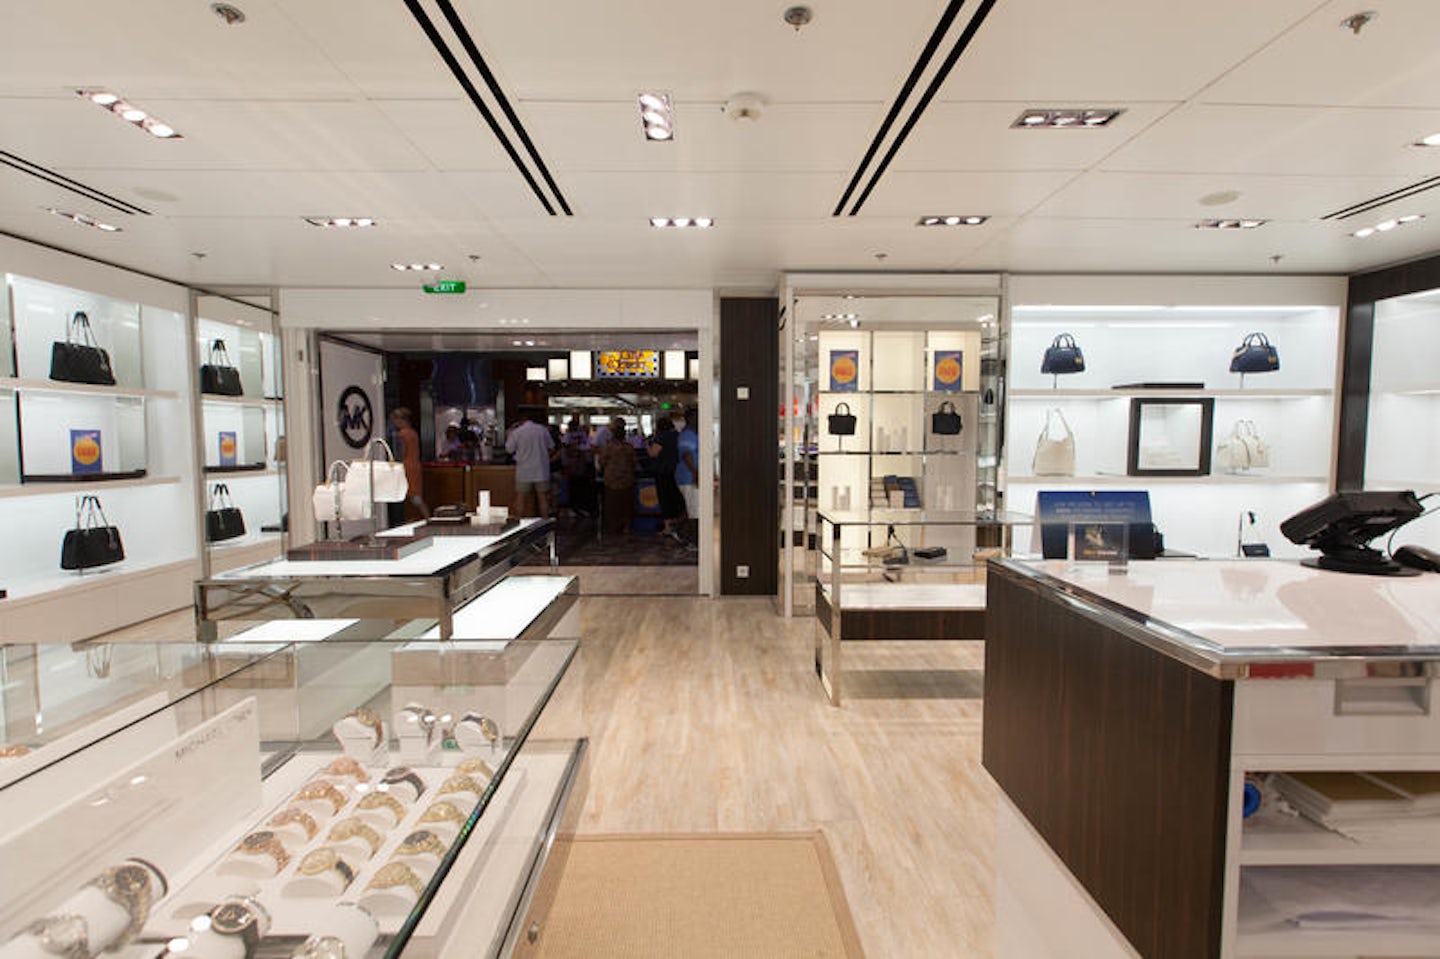 Michael Kors on Independence of the Seas